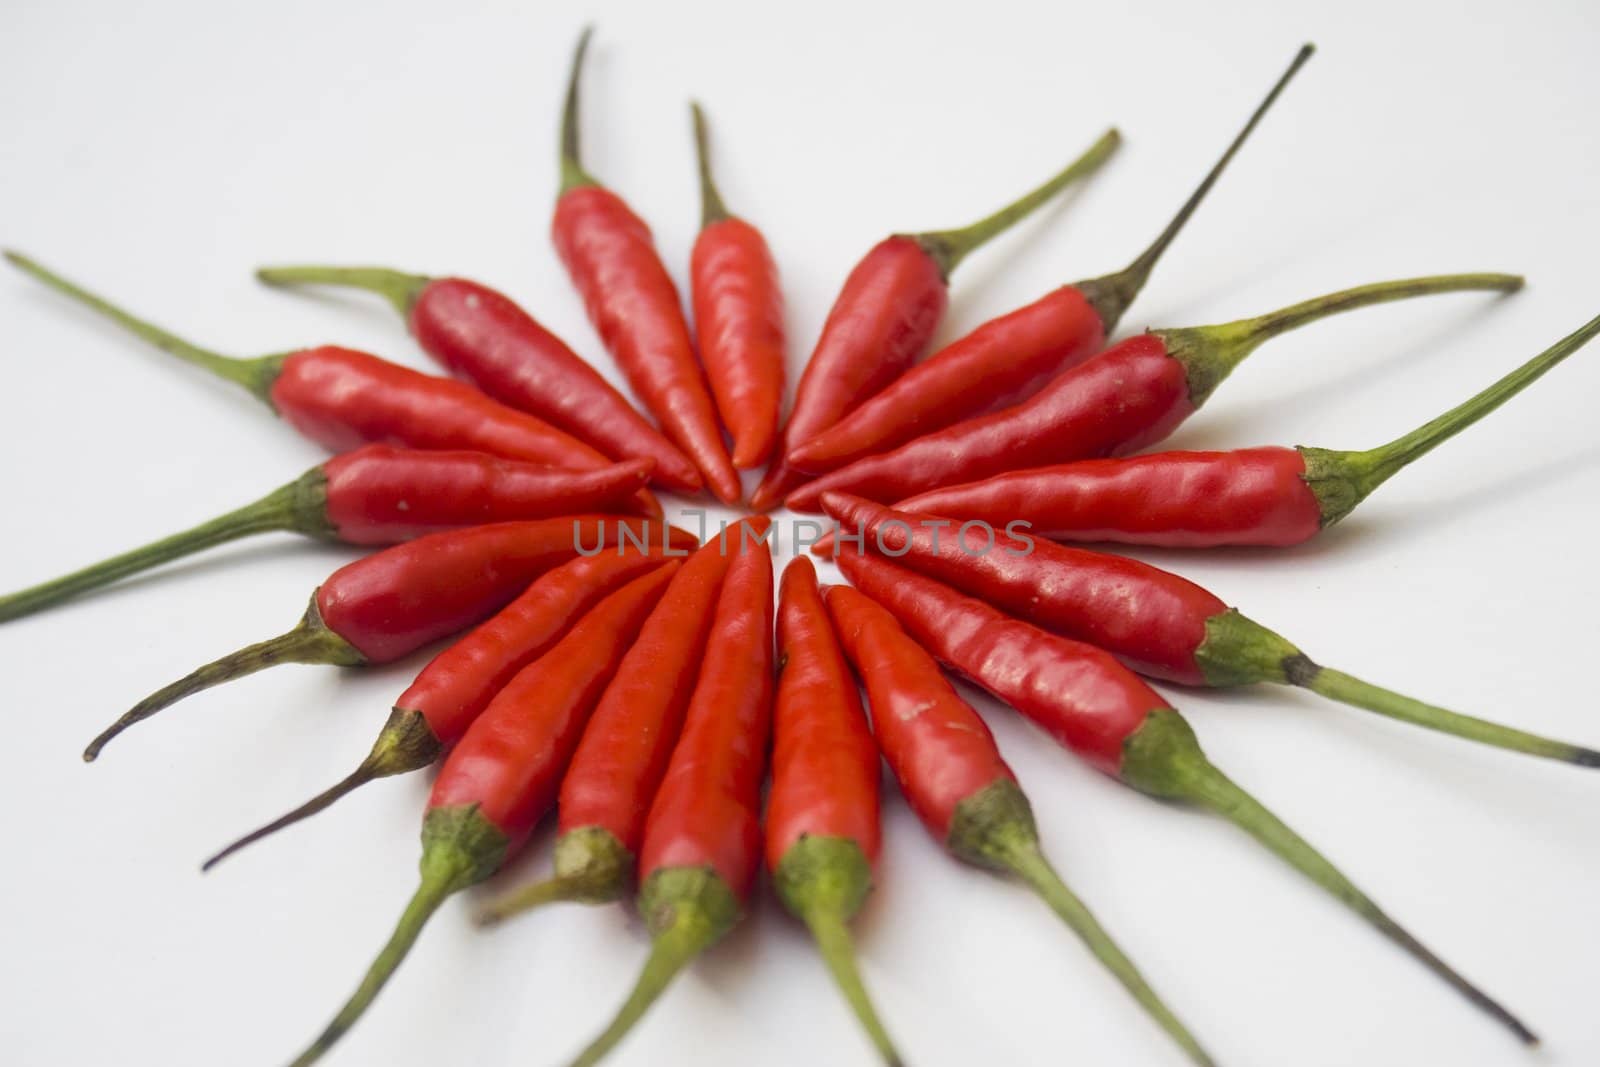 Chili  peppers against white background by timscottrom